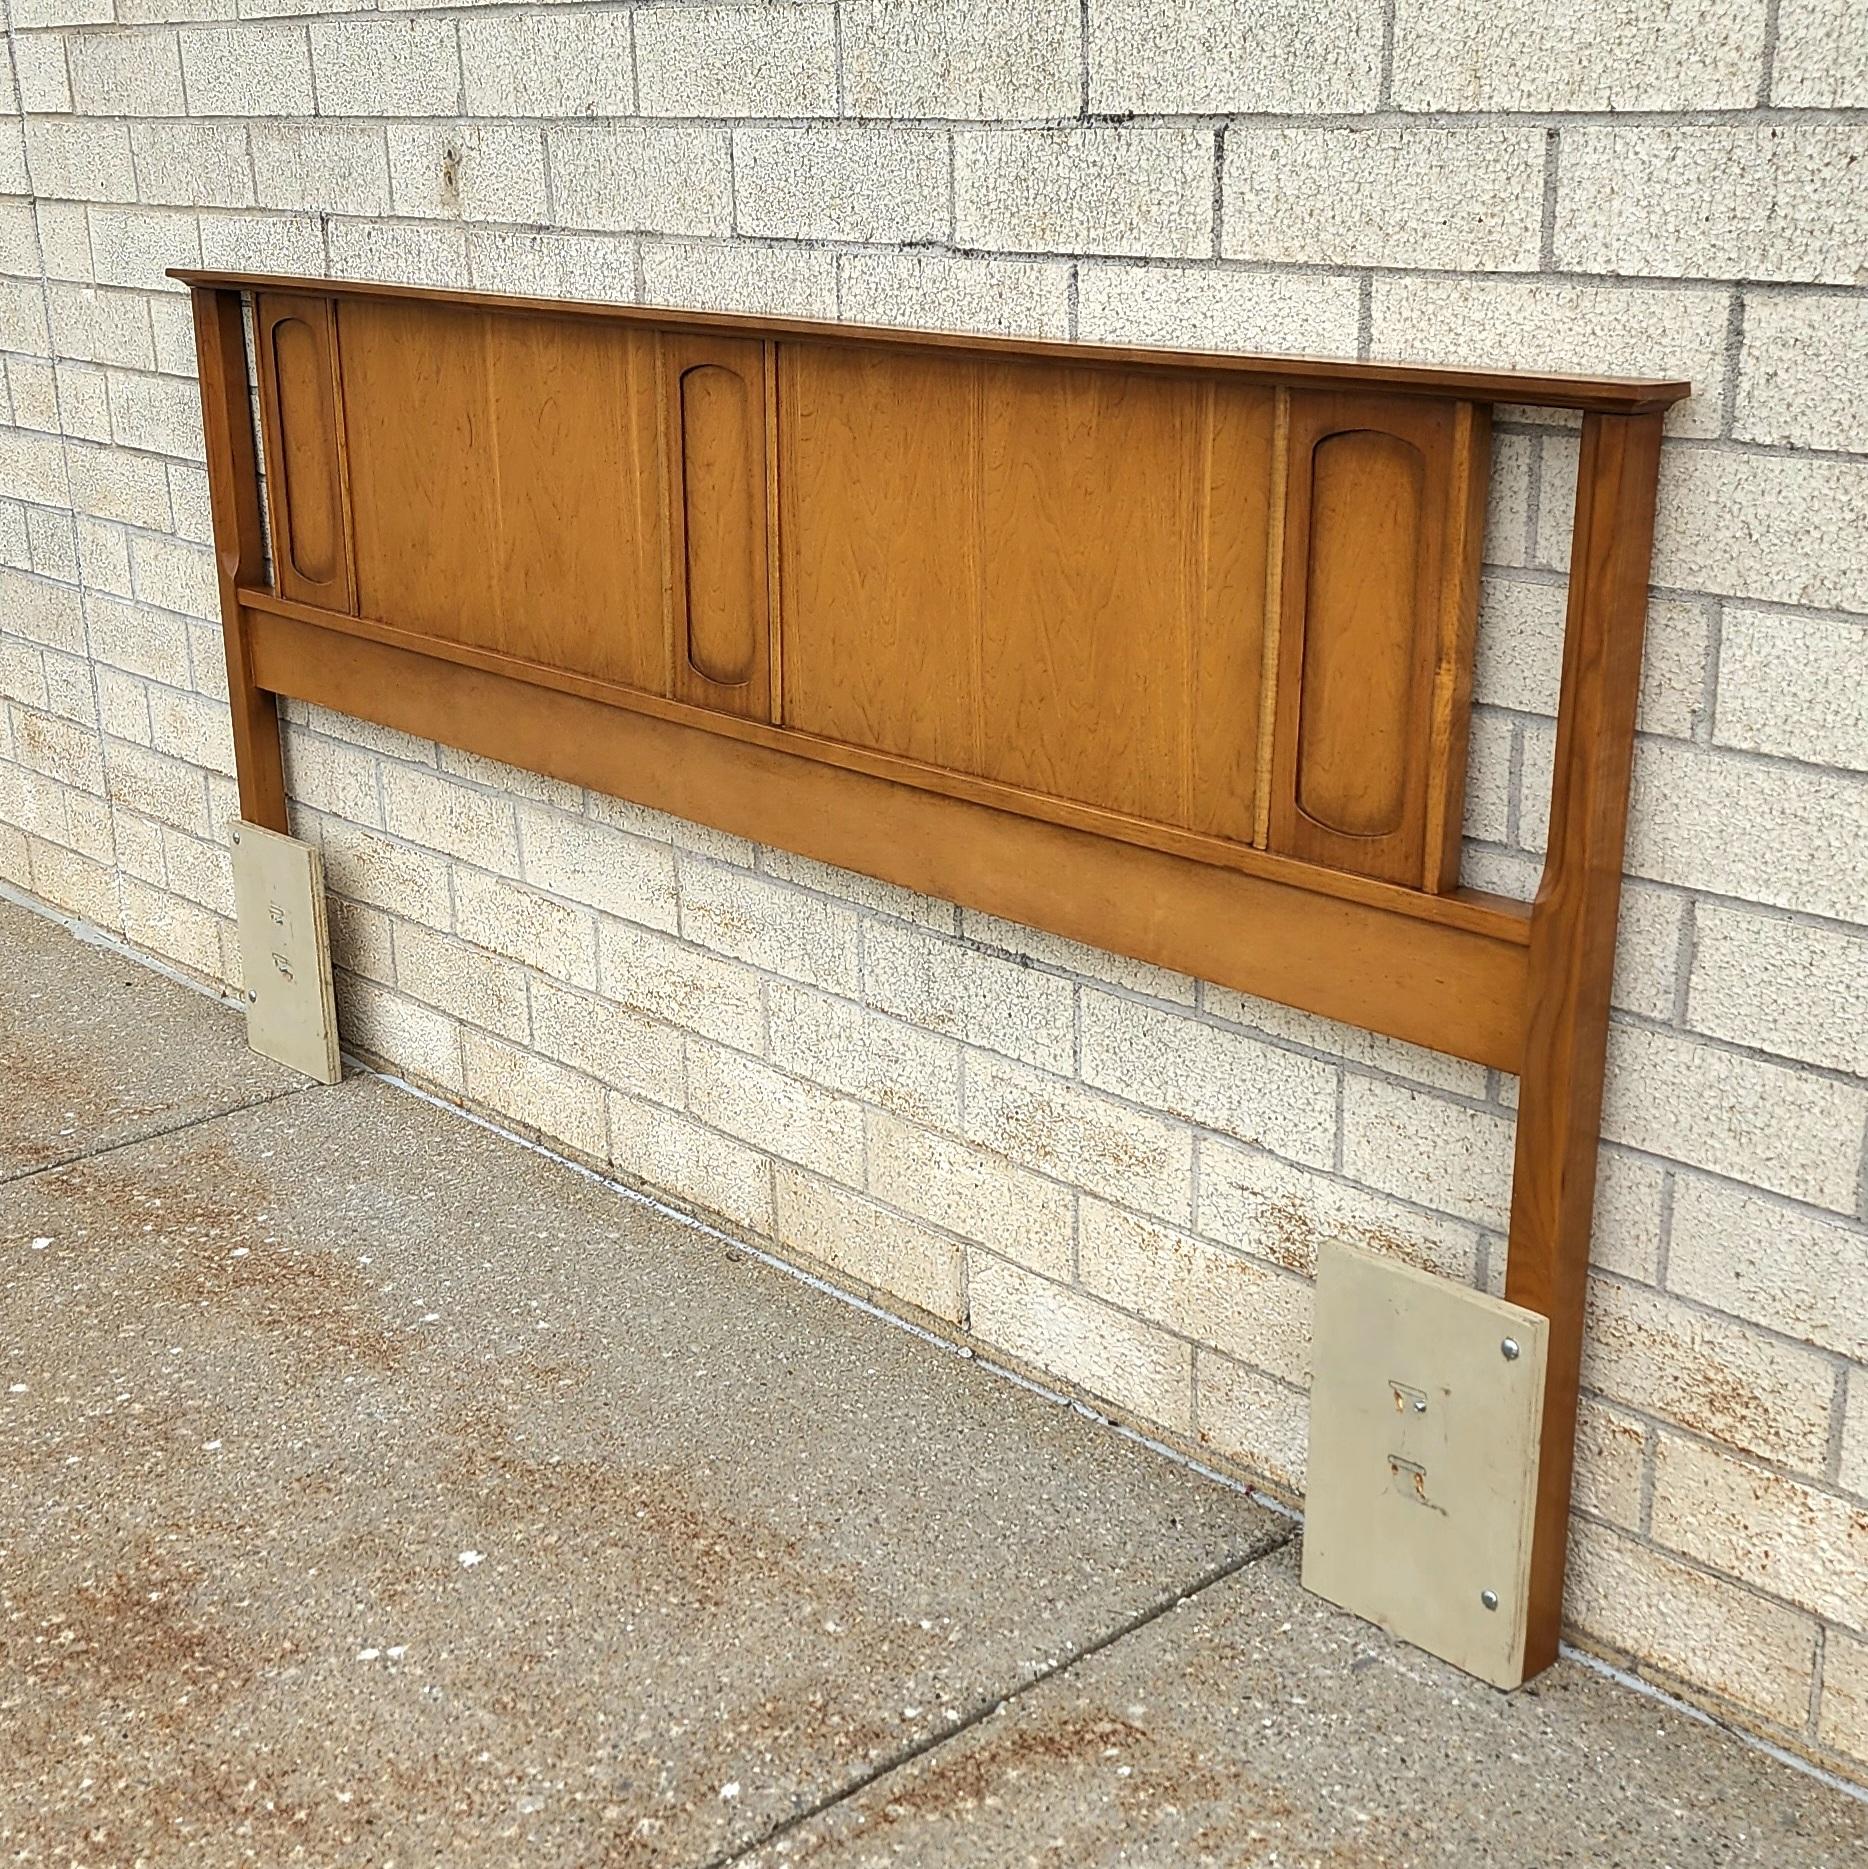 This is a beautiful Mid-Century Headboard by Bassett Furniture made out of solid wood. Made in a 